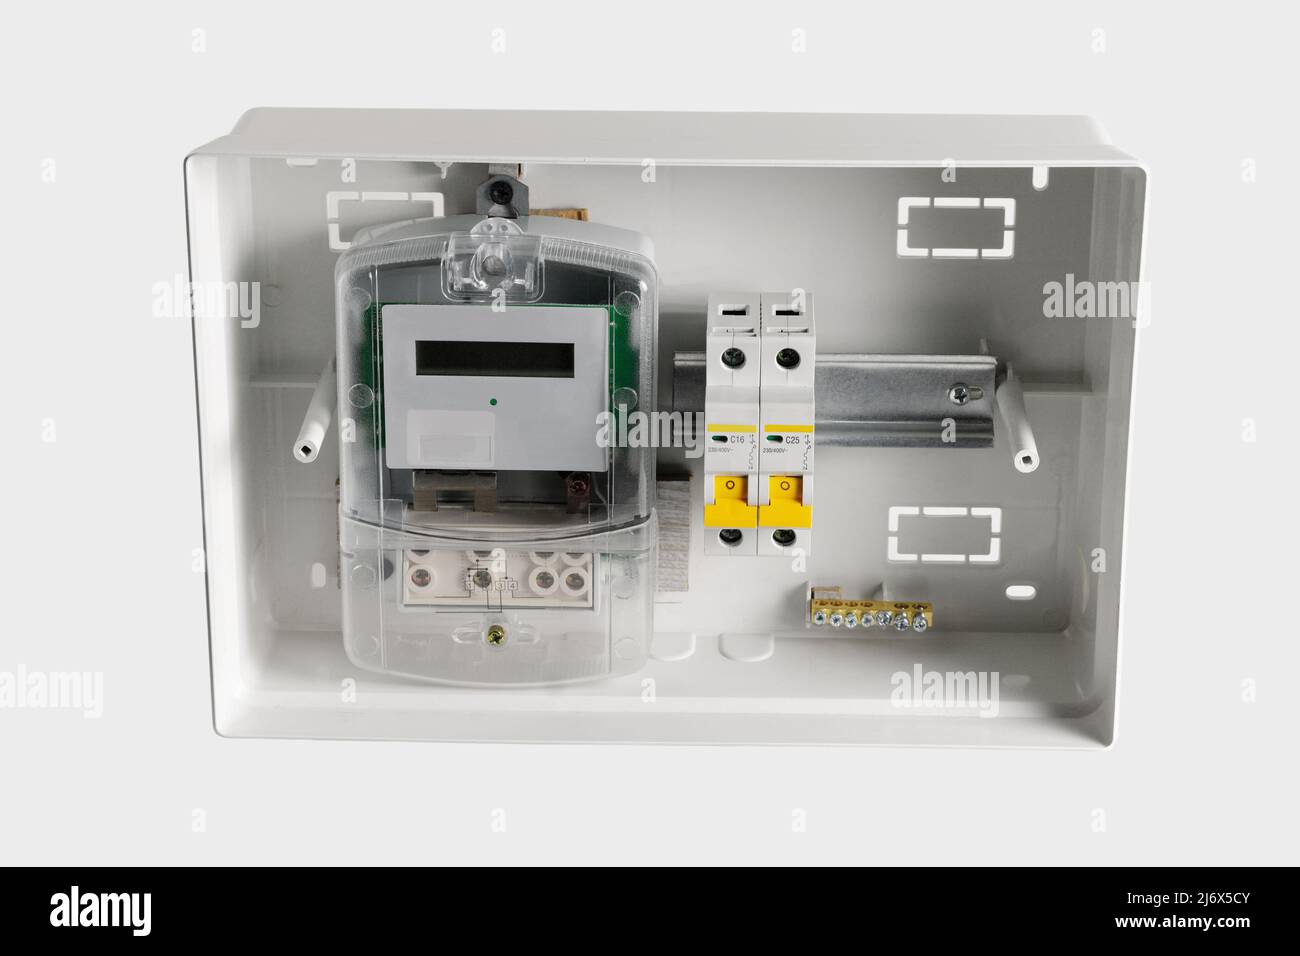 Electricity meter in a plastic electrical panel. Stock Photo